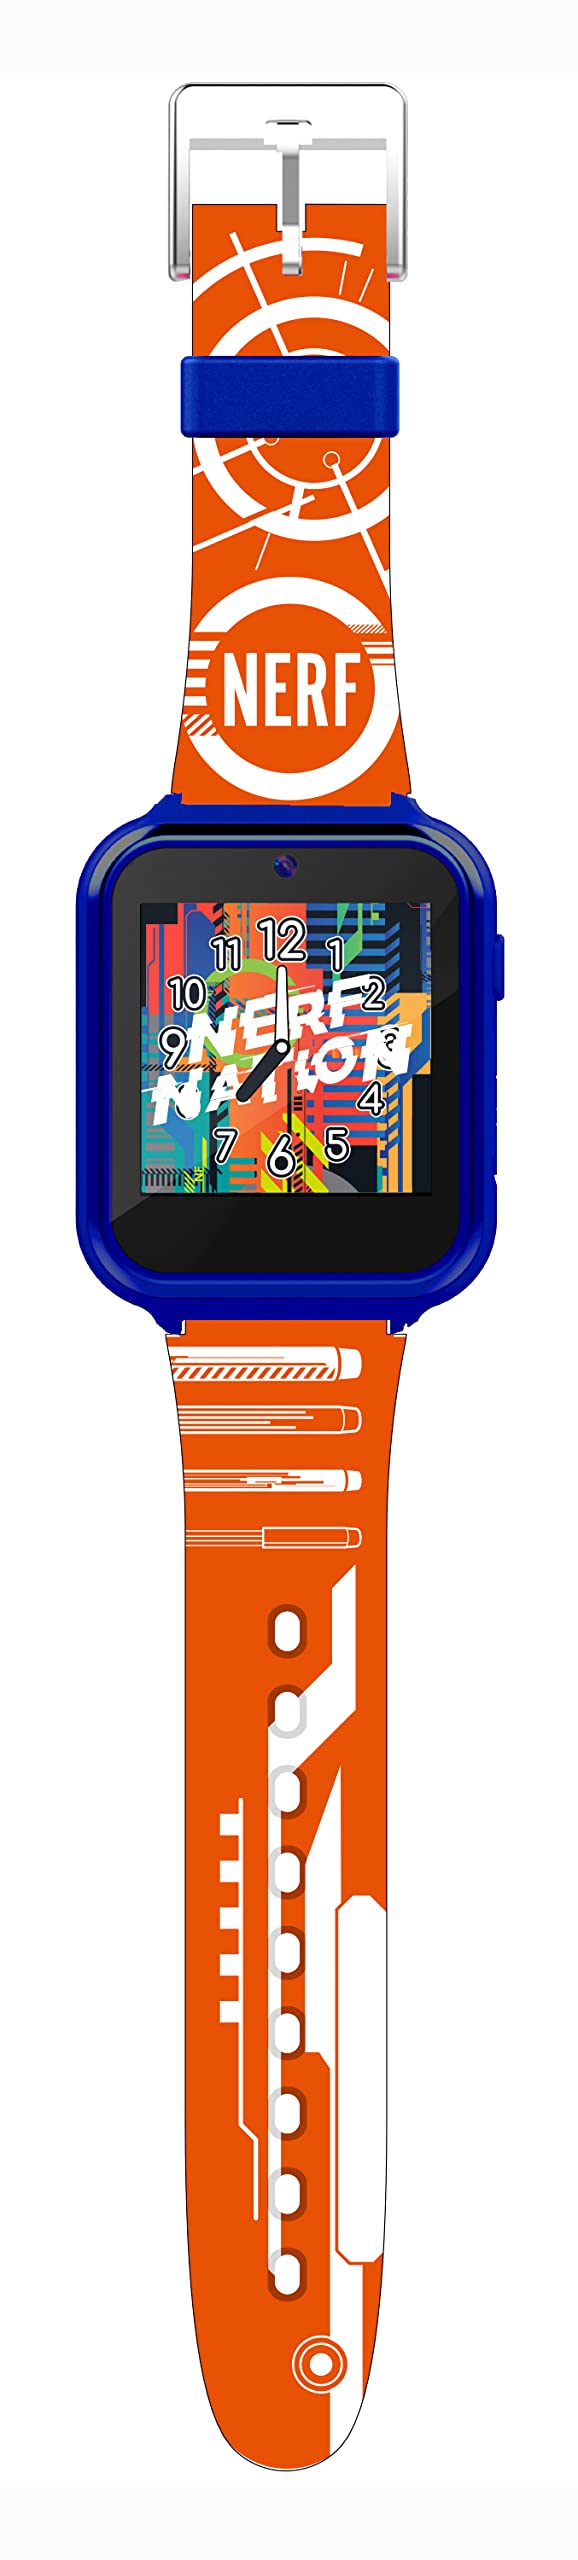 Accutime Nerf Kids Orange Educational Learning Touchscreen Smart Watch Toy for Girls, Boys, Toddlers - Selfie Cam, Learning Games, Alarm, Calculator, Pedometer & More (Model: NRF4020AZ)